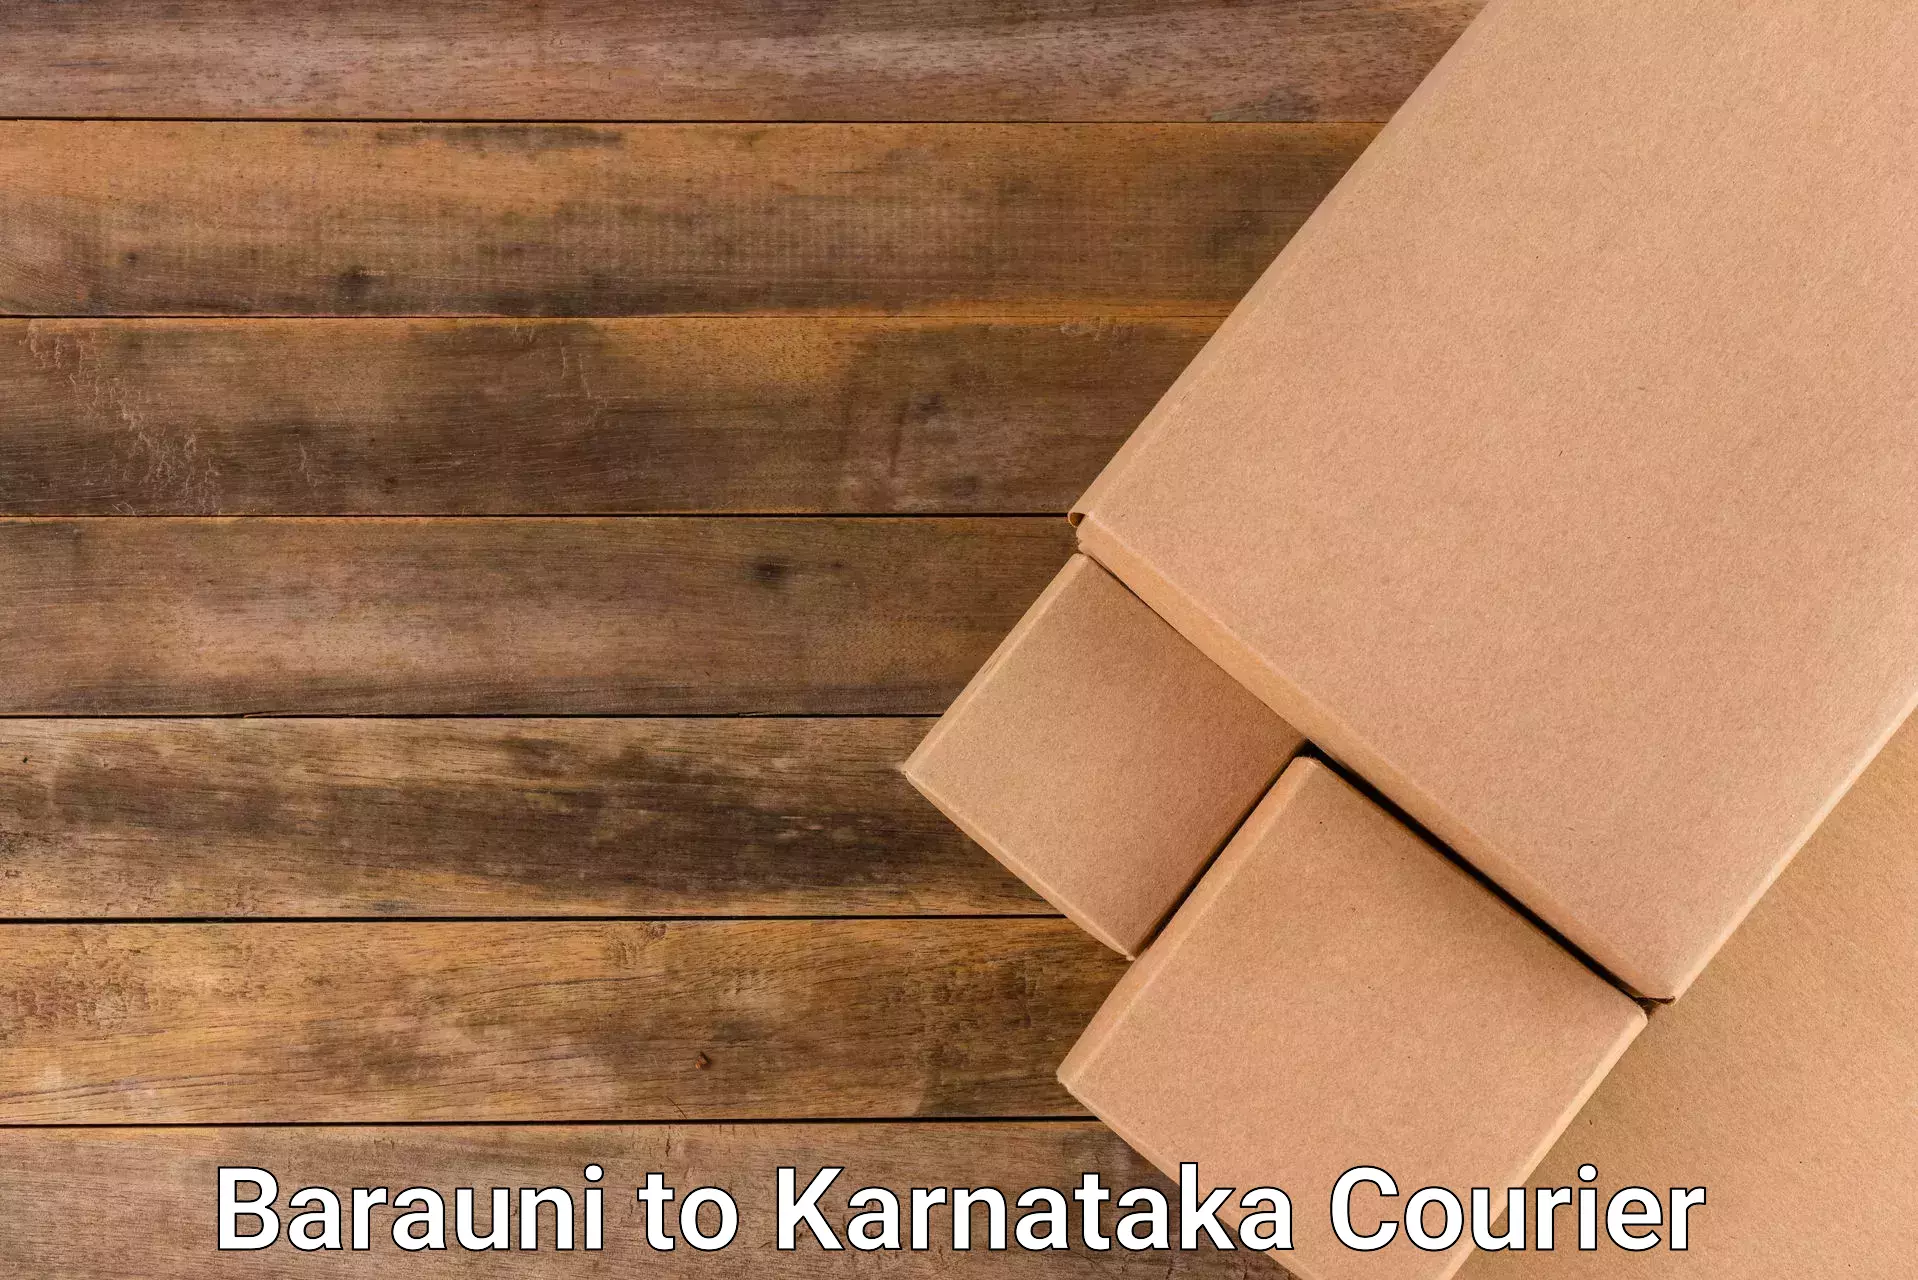 Doorstep delivery service Barauni to Jagalur